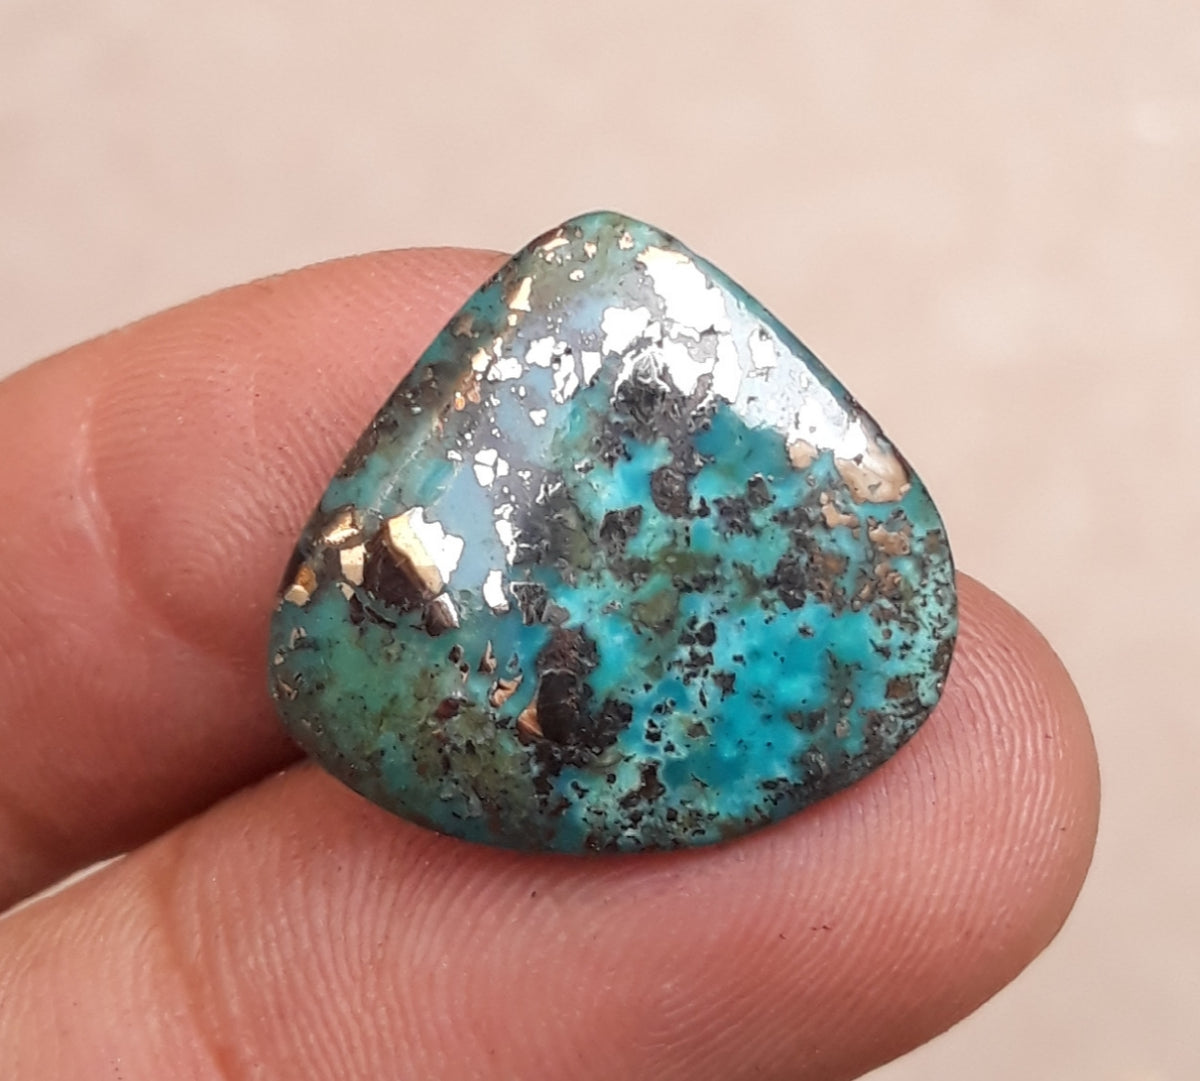 11.25ct Morenci Turquoise - Natural Certified Turquoise with Pyrite - Blue Matrix Turquoise - Shajri Feroza - 20x21mm